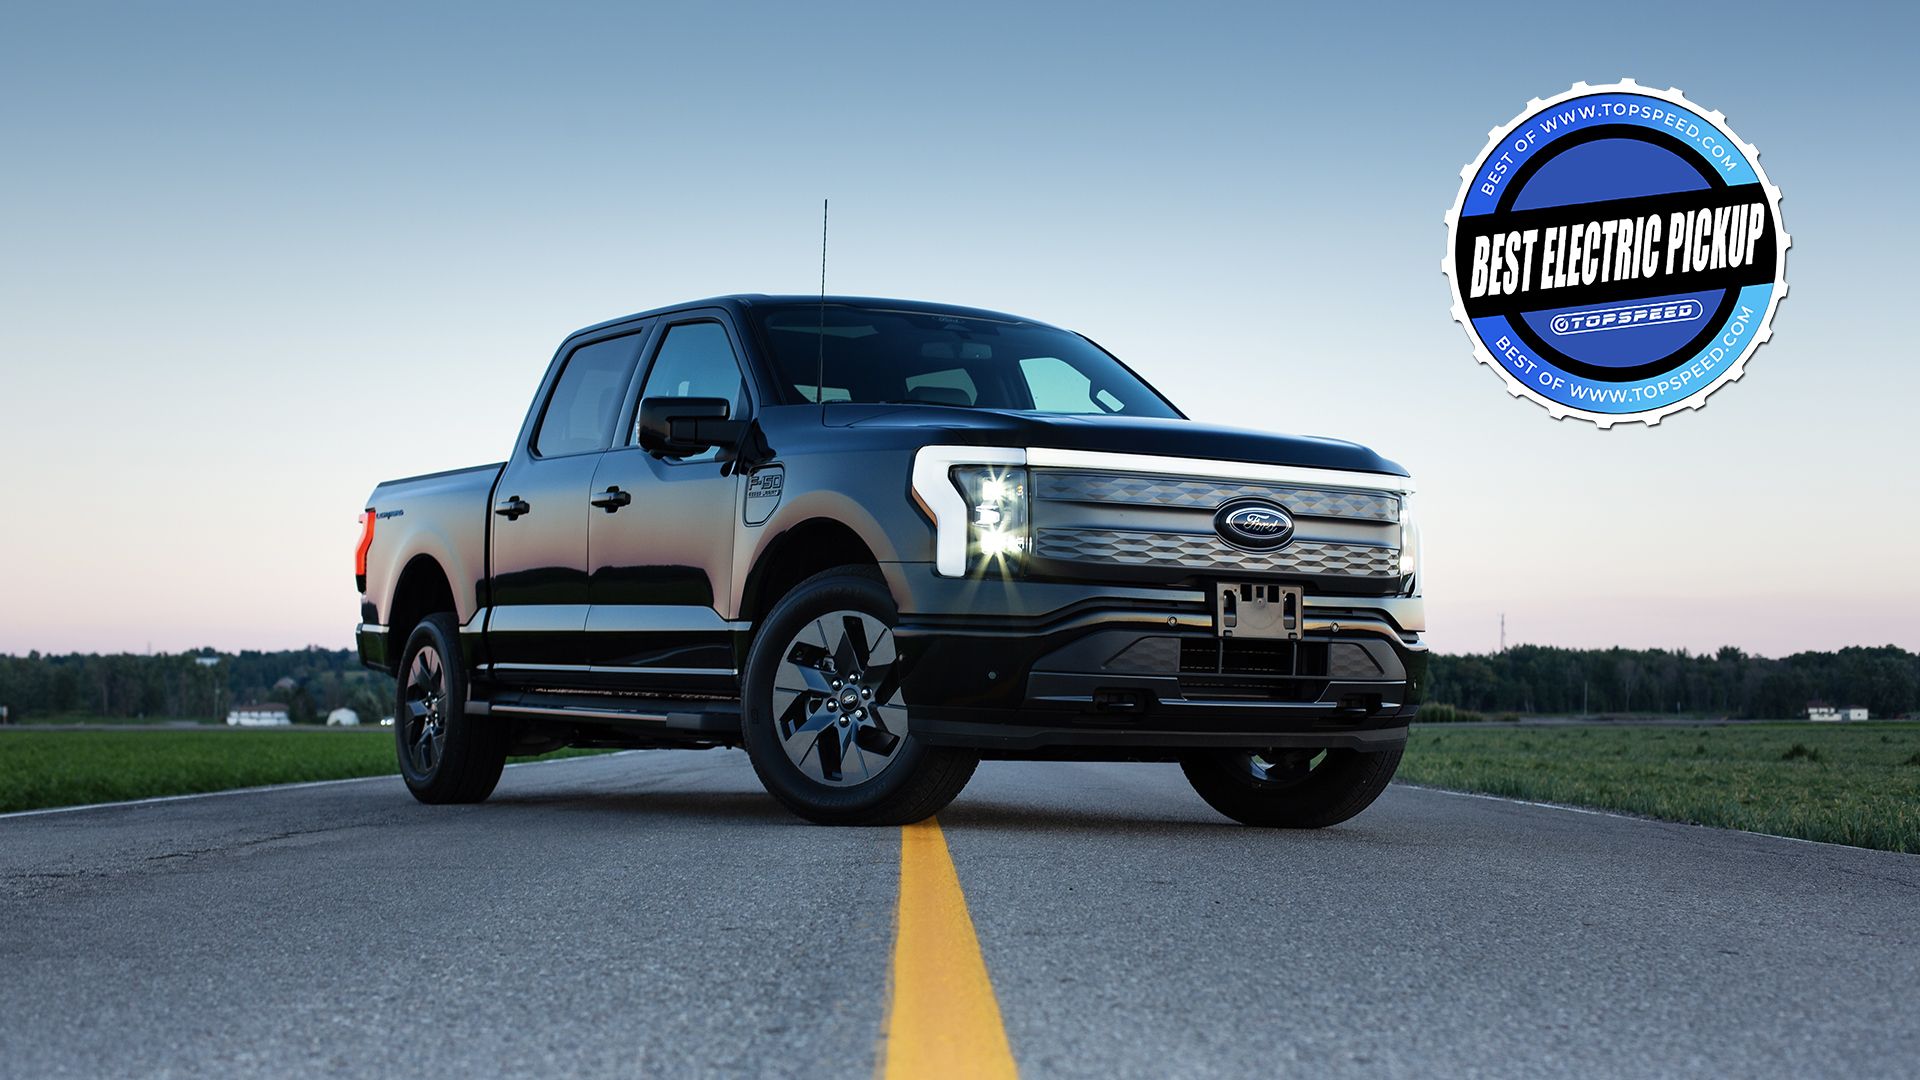 Black Ford F150 Lightning Electric Truck On The Road